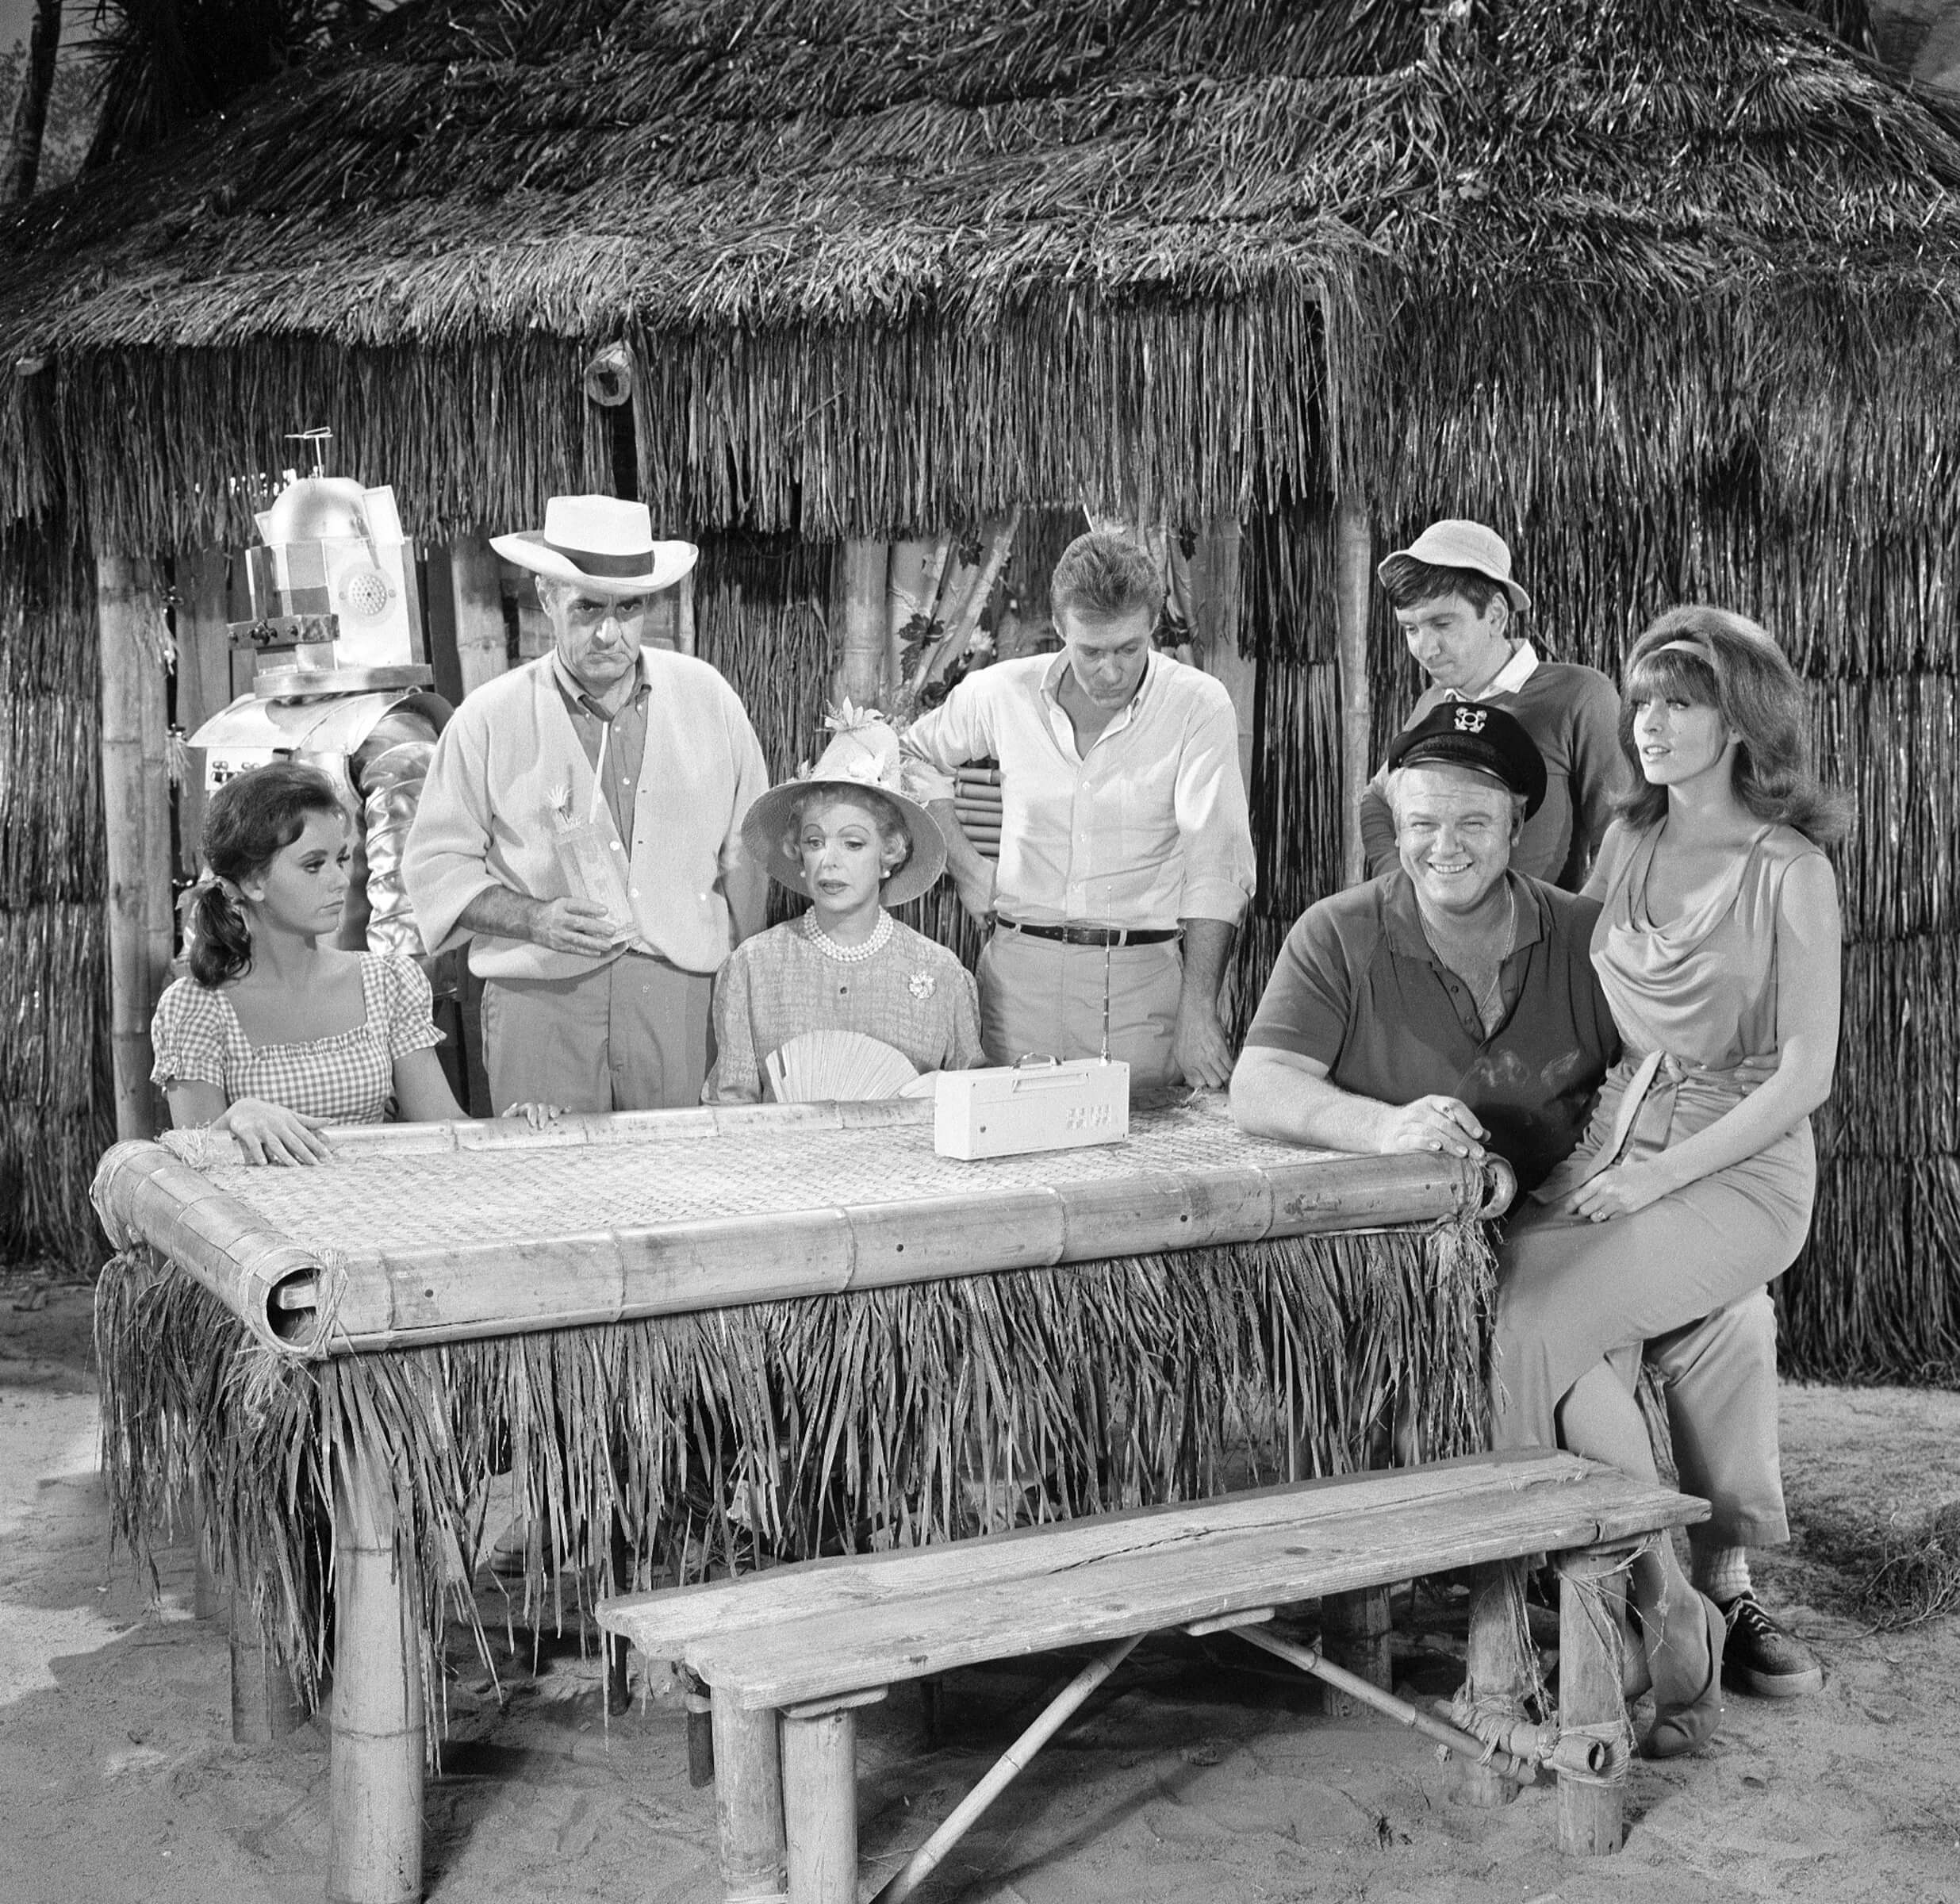 A black and white photo of the 'Gilligan's Island' cast members gathered around a bamboo picnic table on set of the TV comedy.